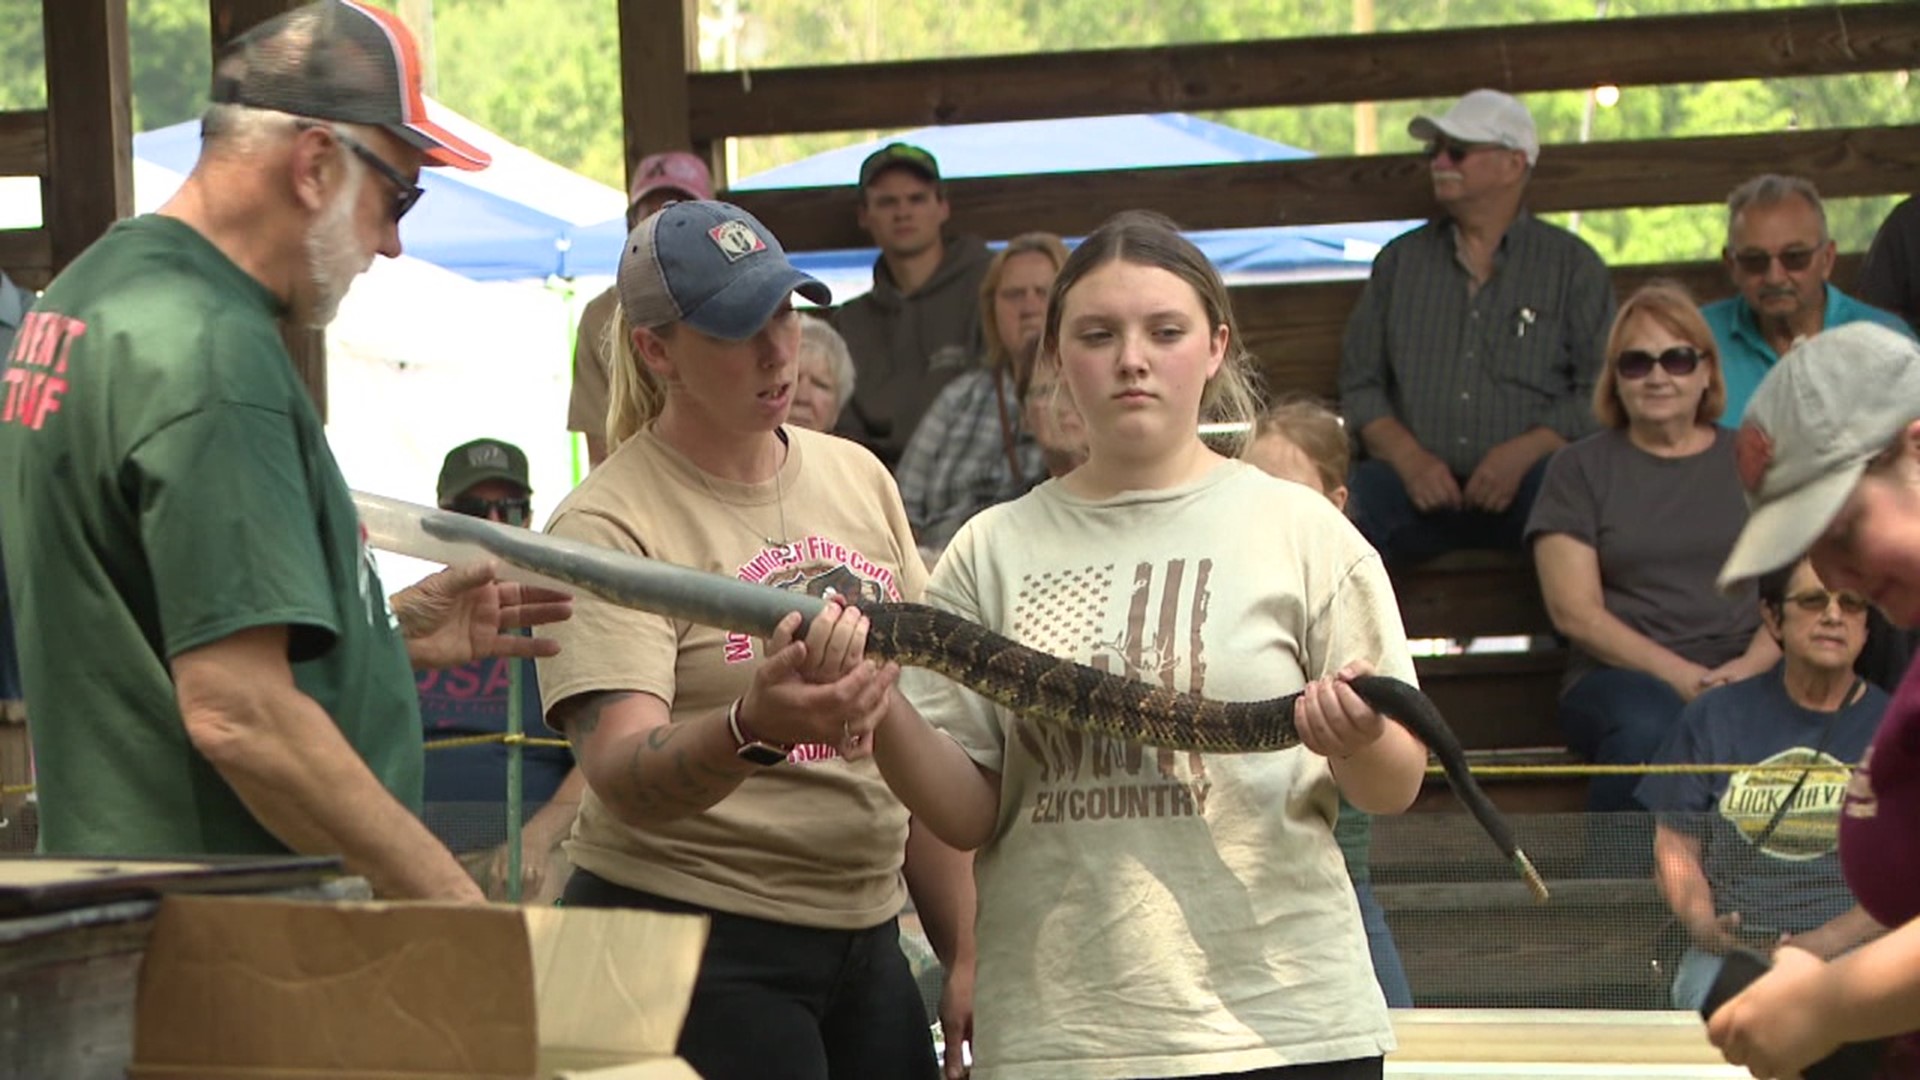 It's similar to any other fireman's carnival, with rides, games, and food, but also with snakes.